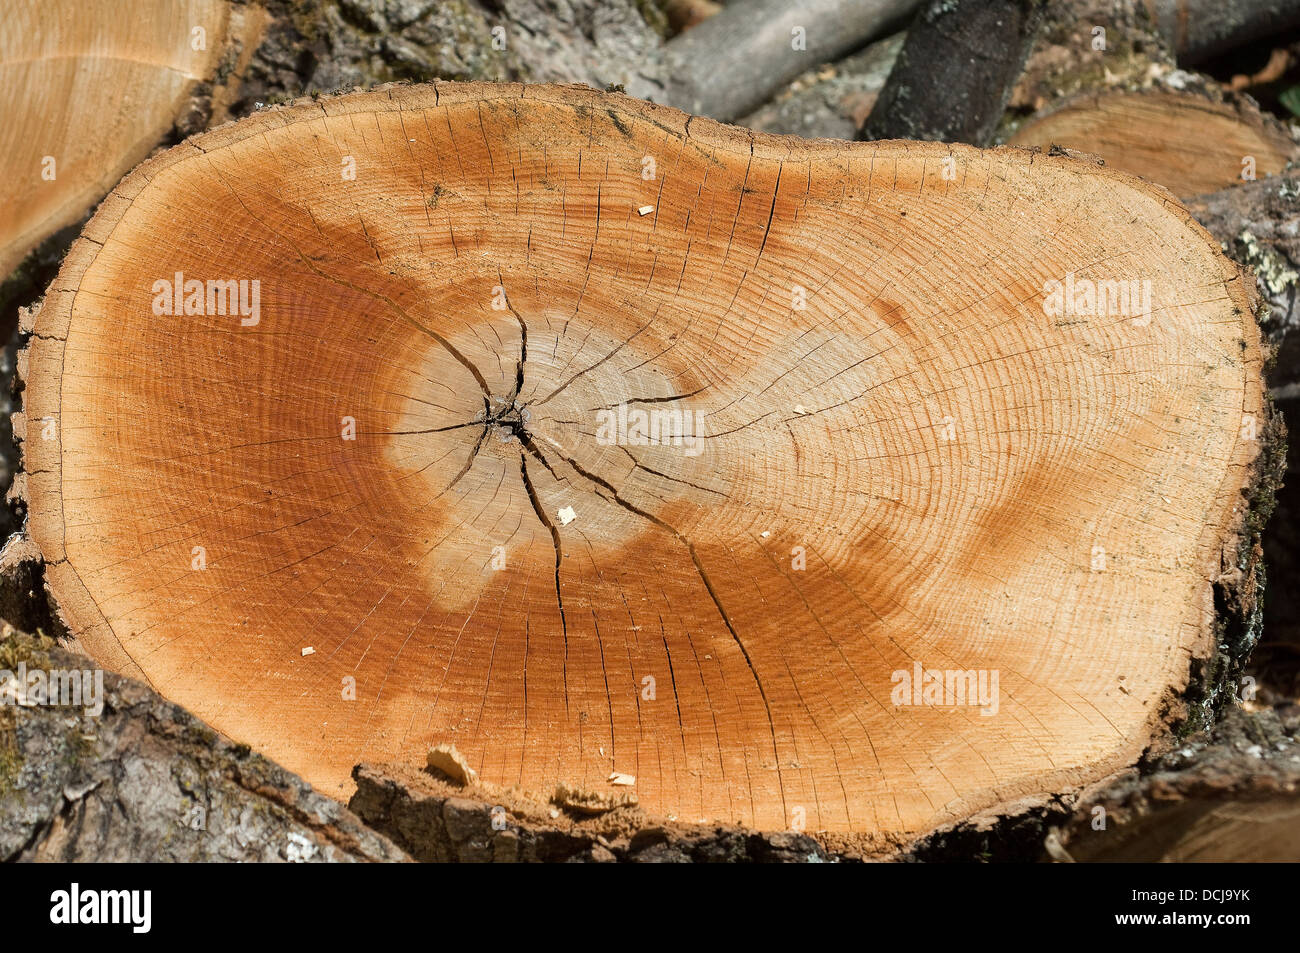 Maple tree cross-section showing its tree rings. Digital photograph Stock Photo